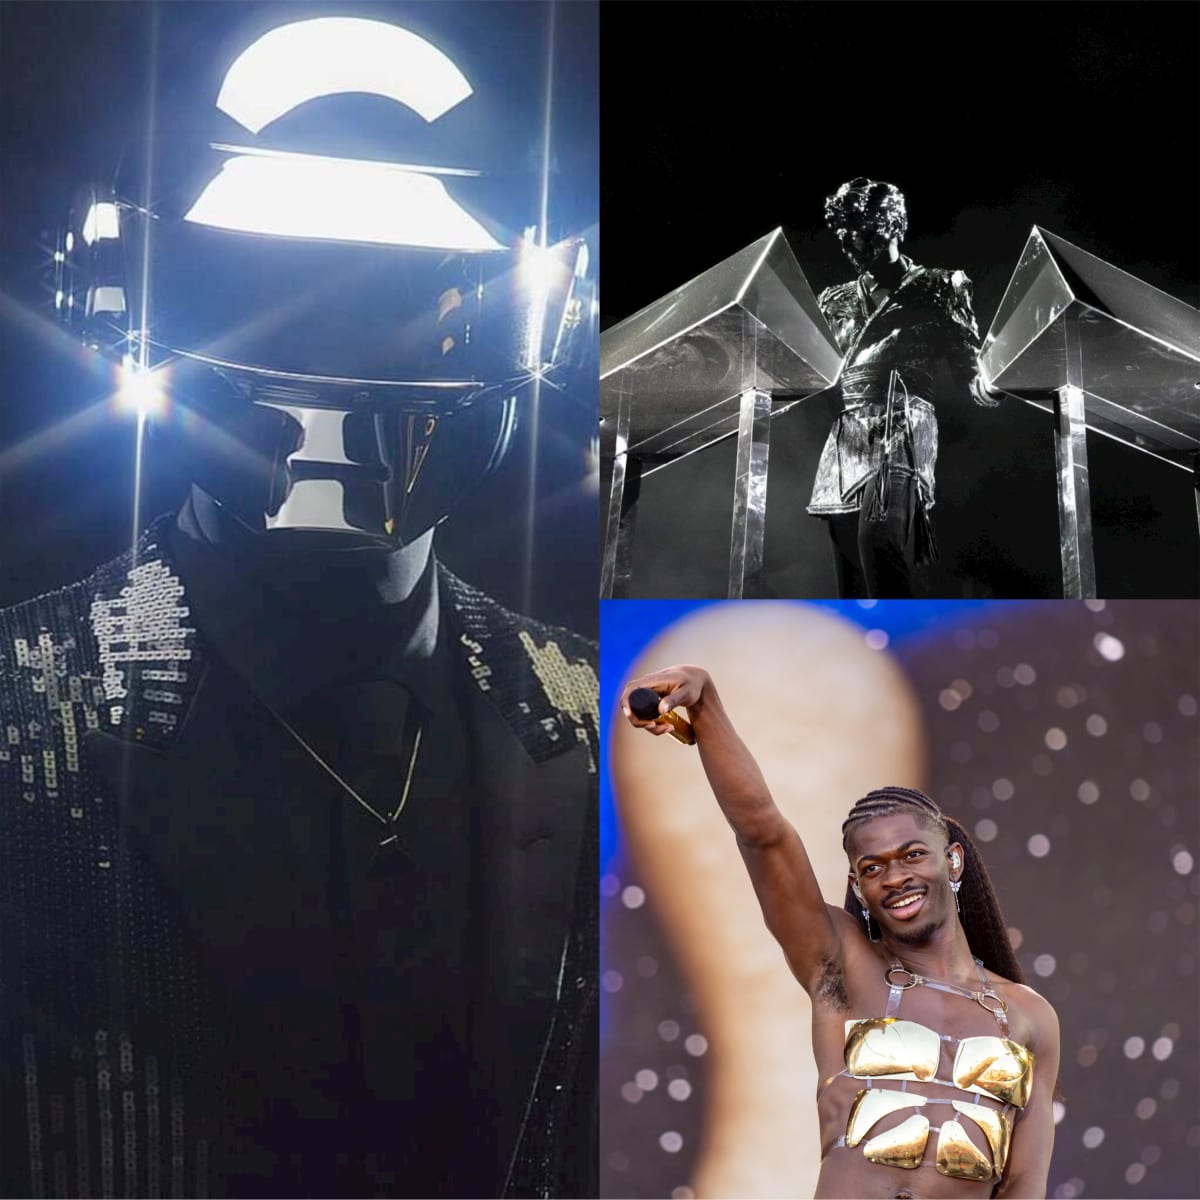 Rumors of Collaboration by Daft Punk’s Thomas Bangalter, Gesaffelstein and Lil Nas X Gain Traction